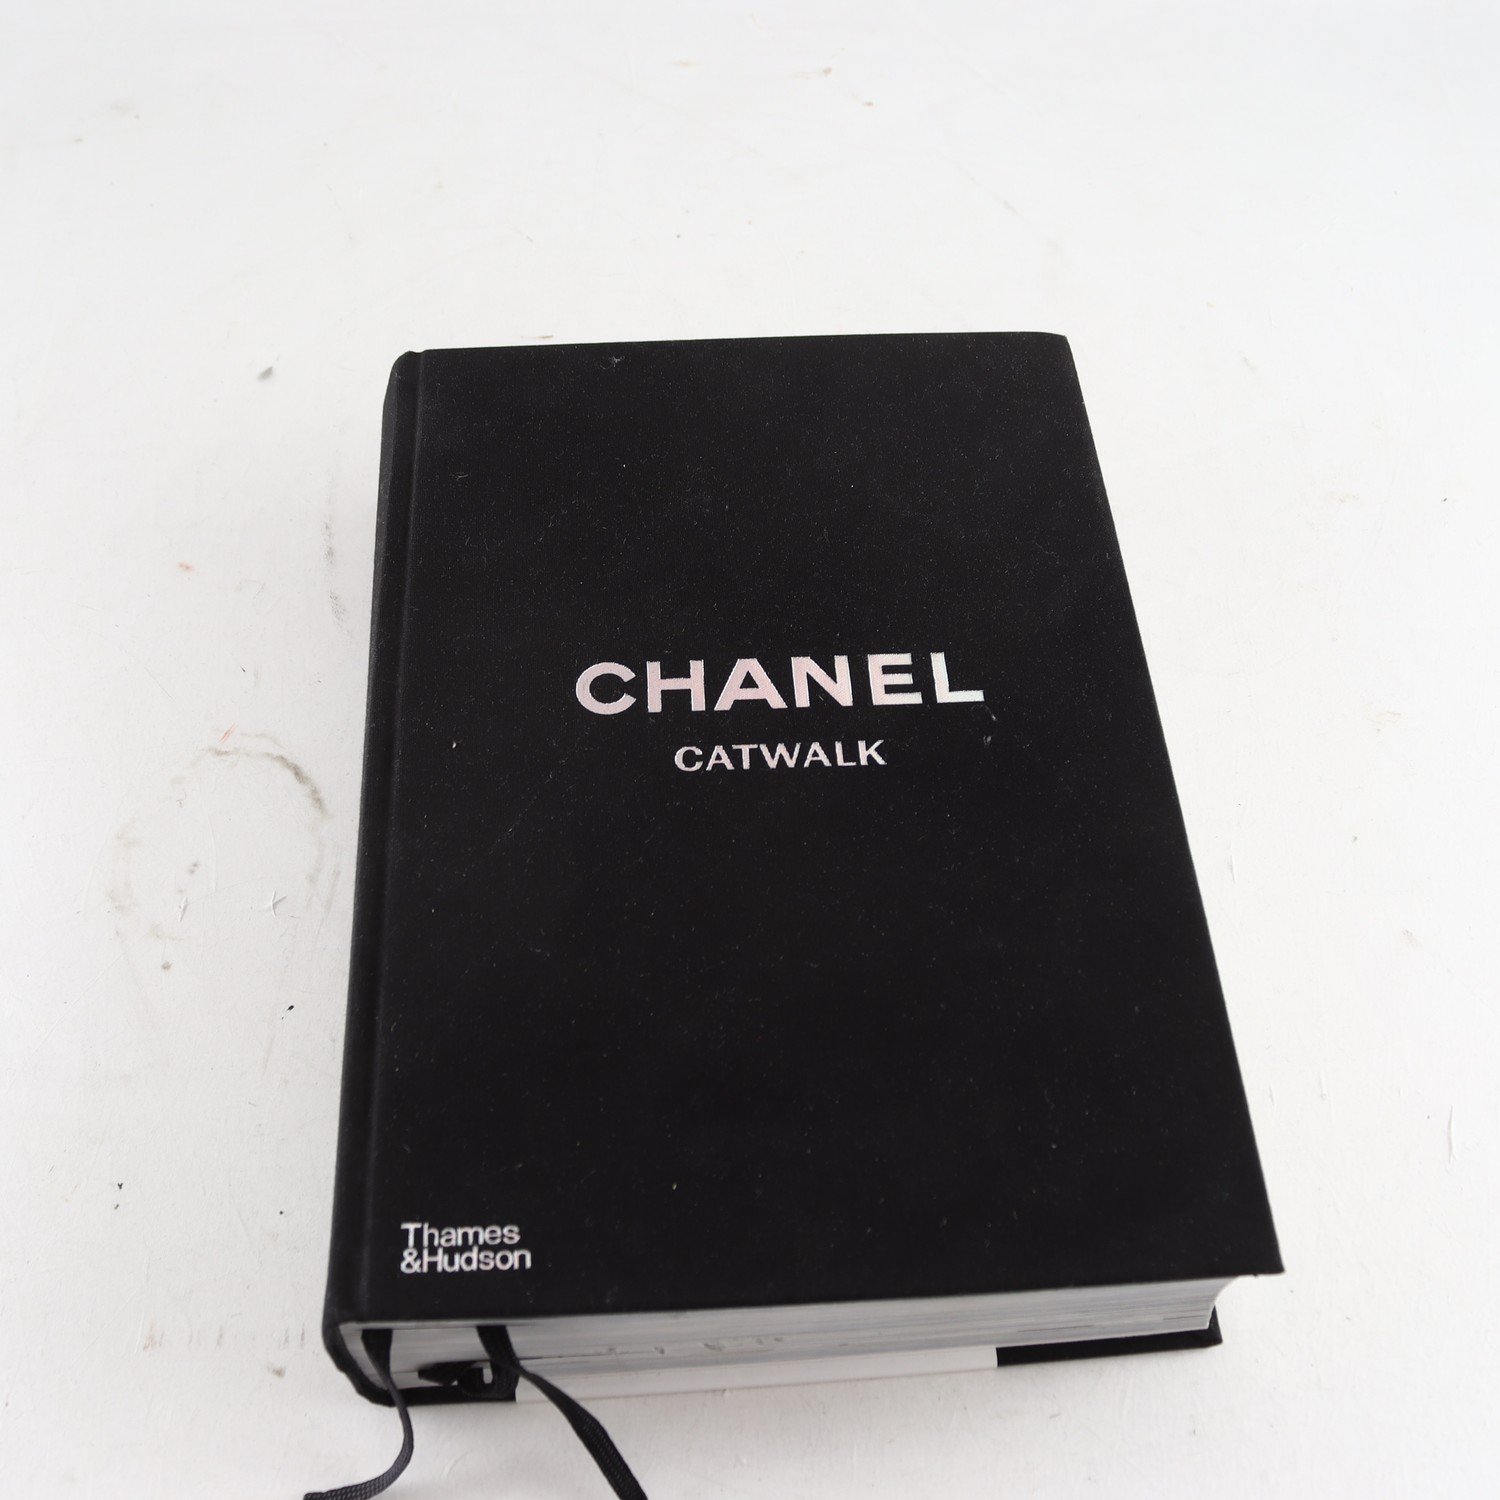 Chanel catwalk, The complete Collections